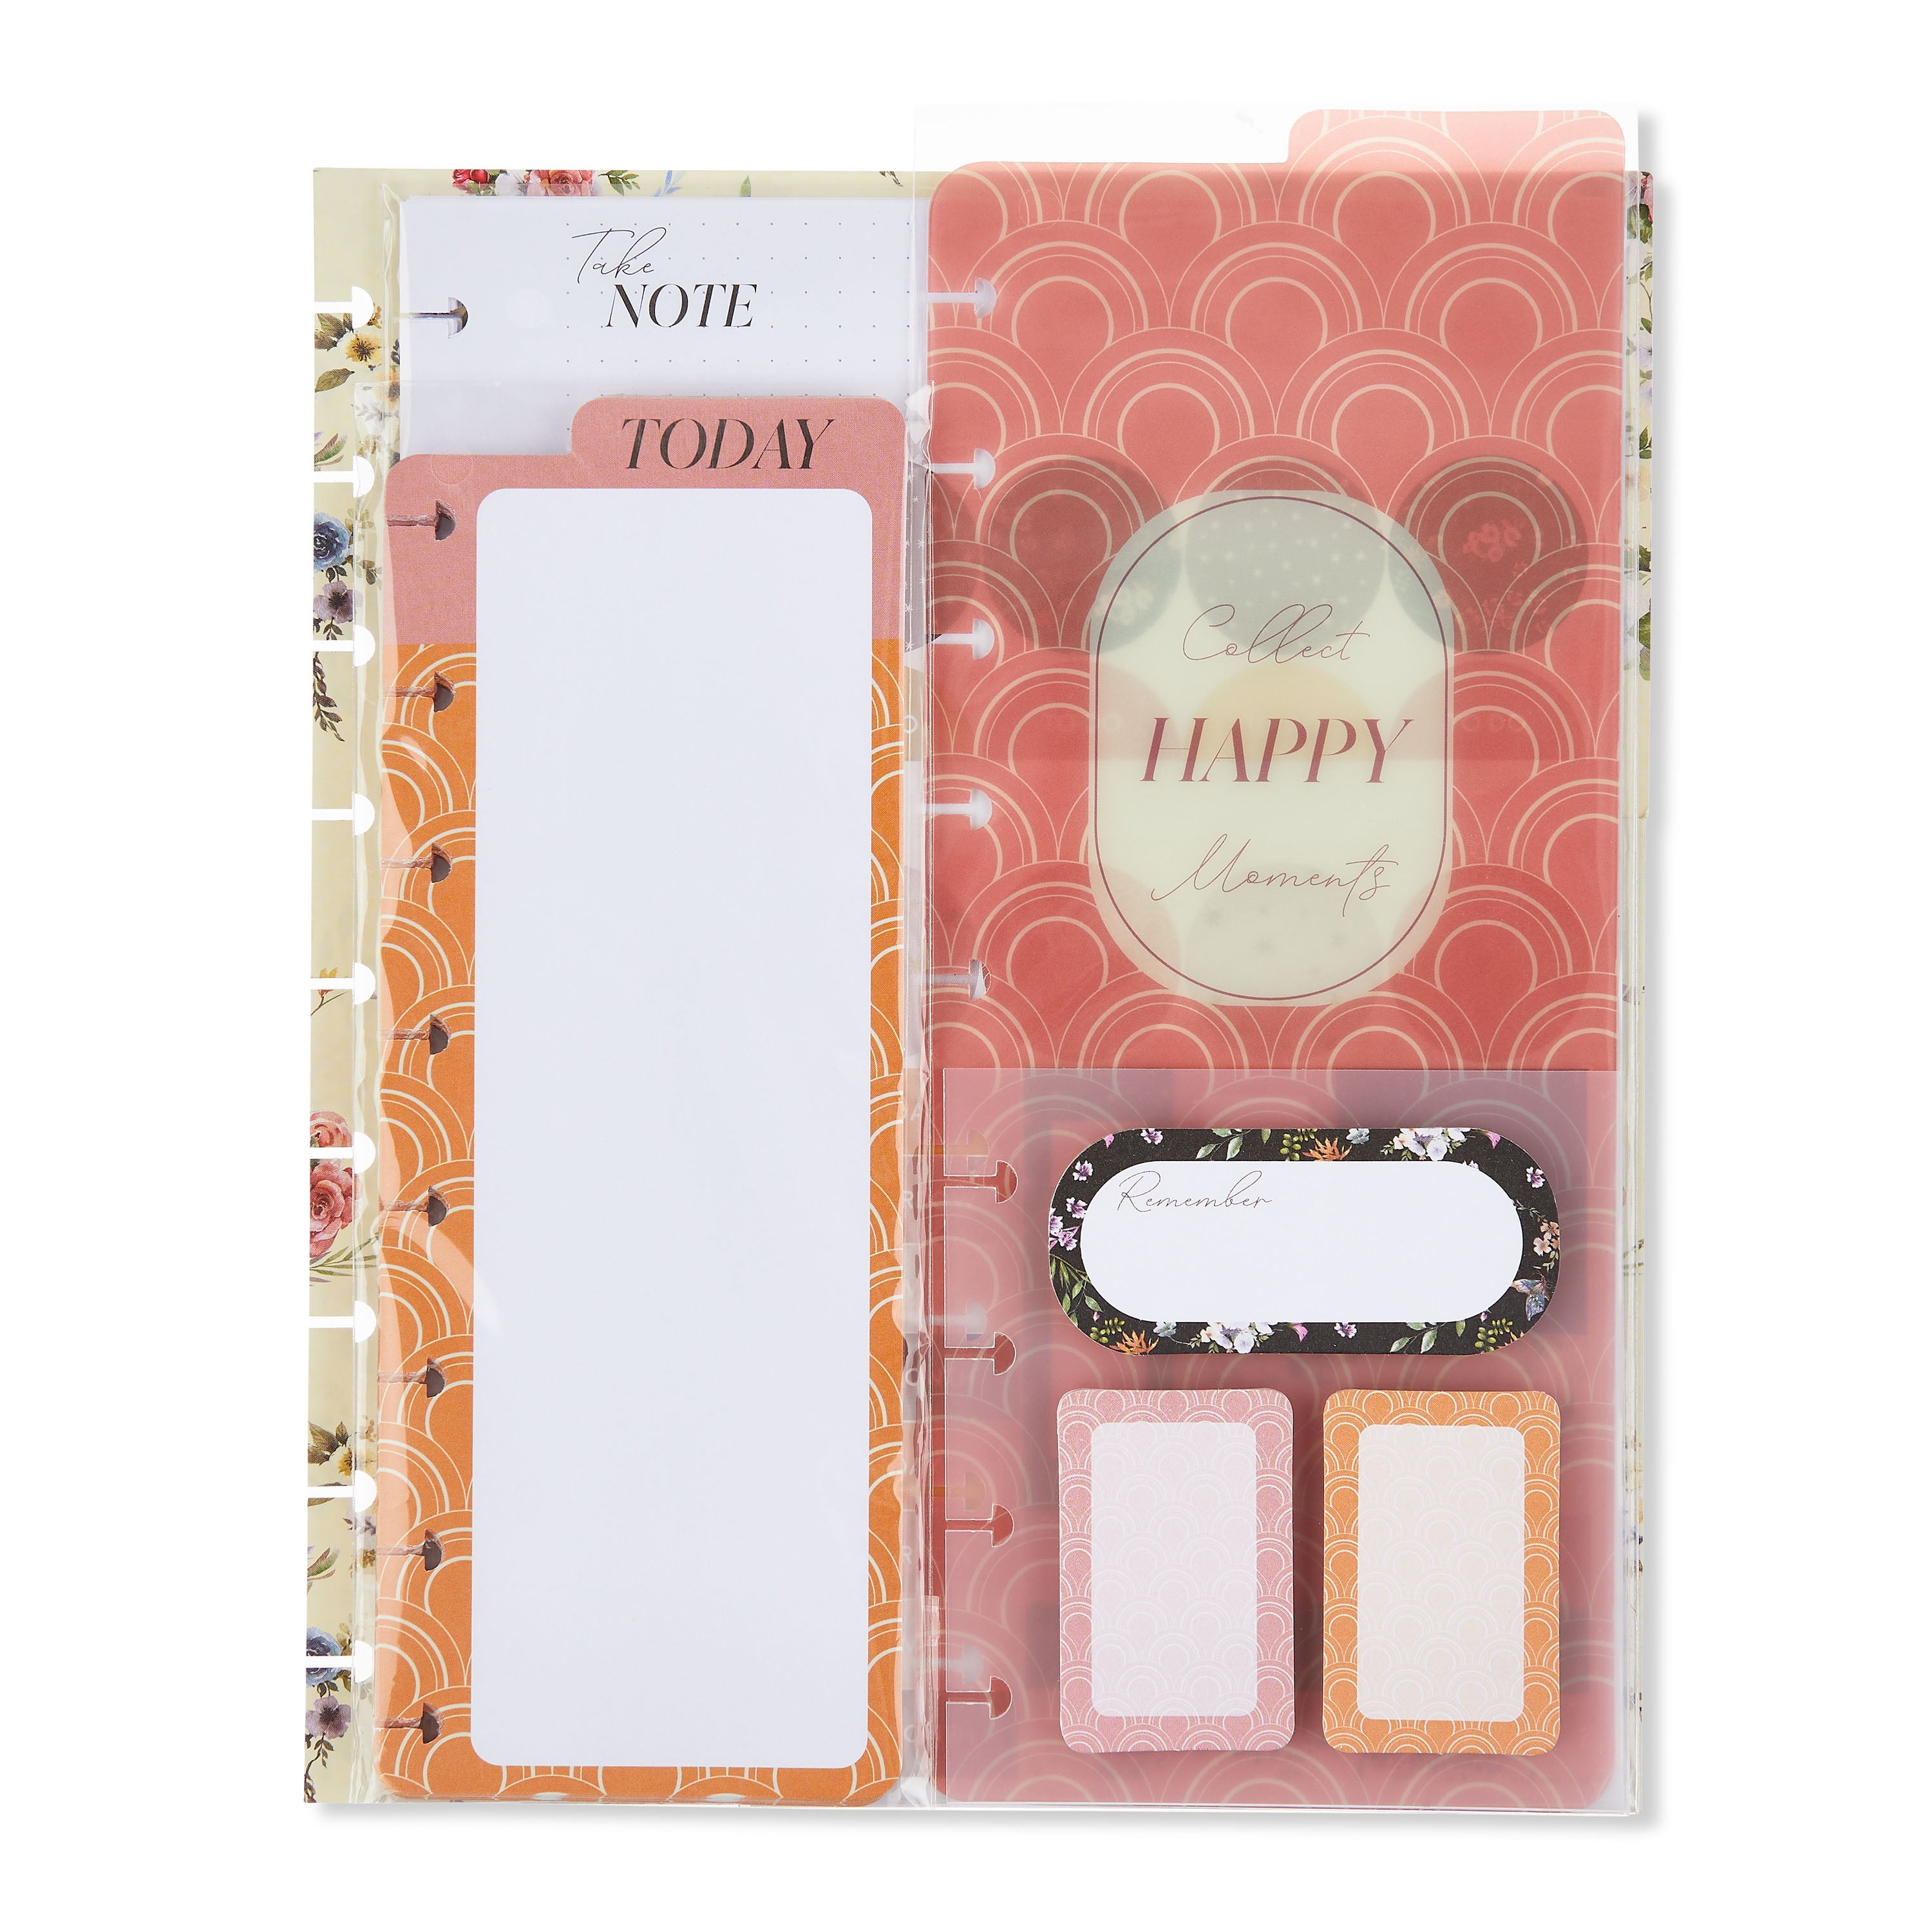 Great Value Kits & Bundles with Planner Accessories